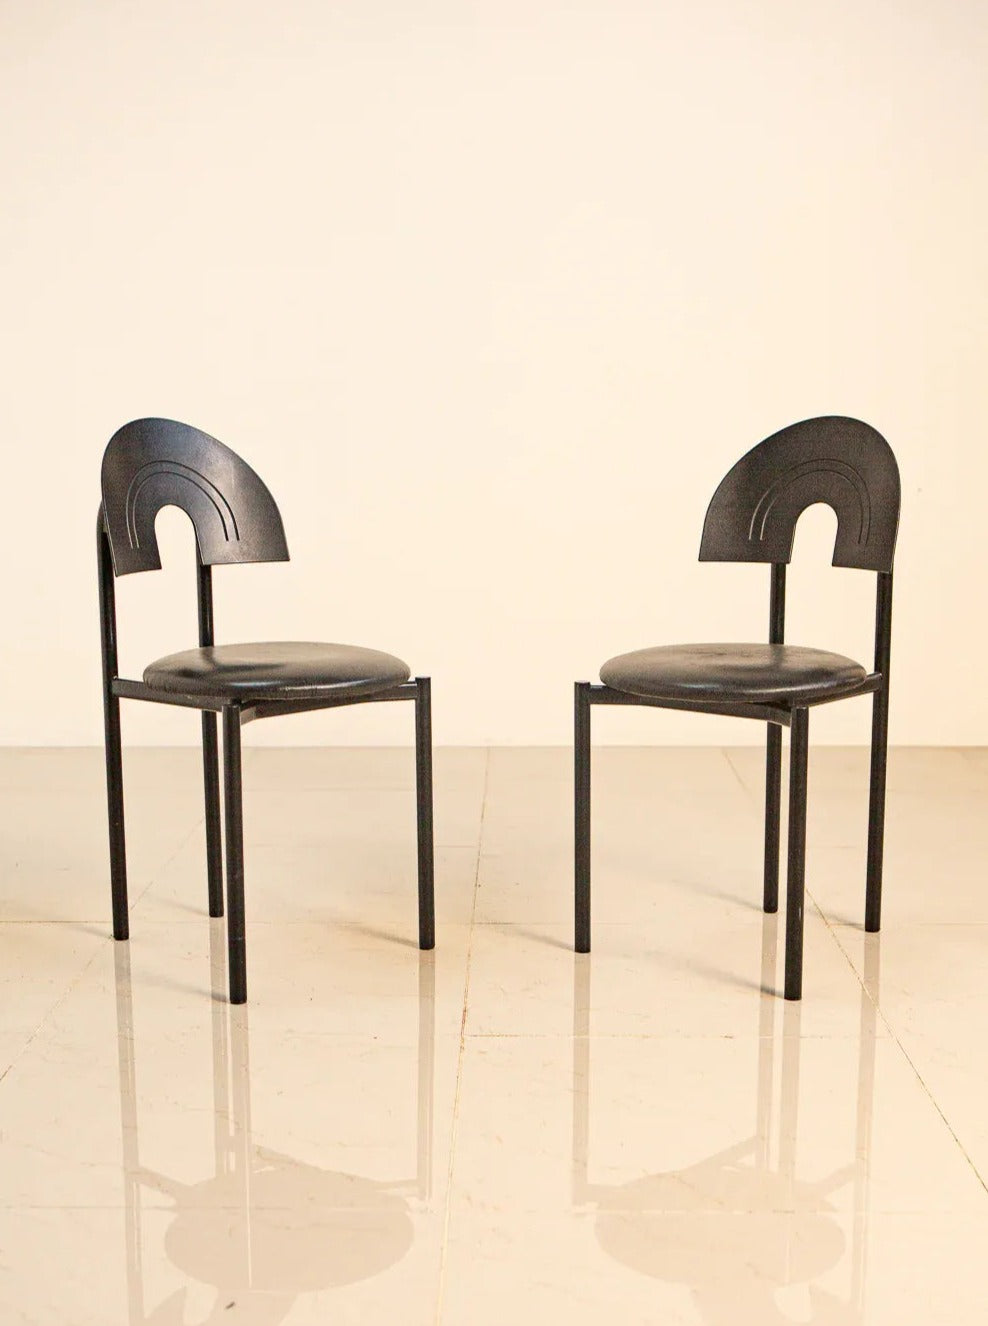 Pair of black chairs by Kembo 90's